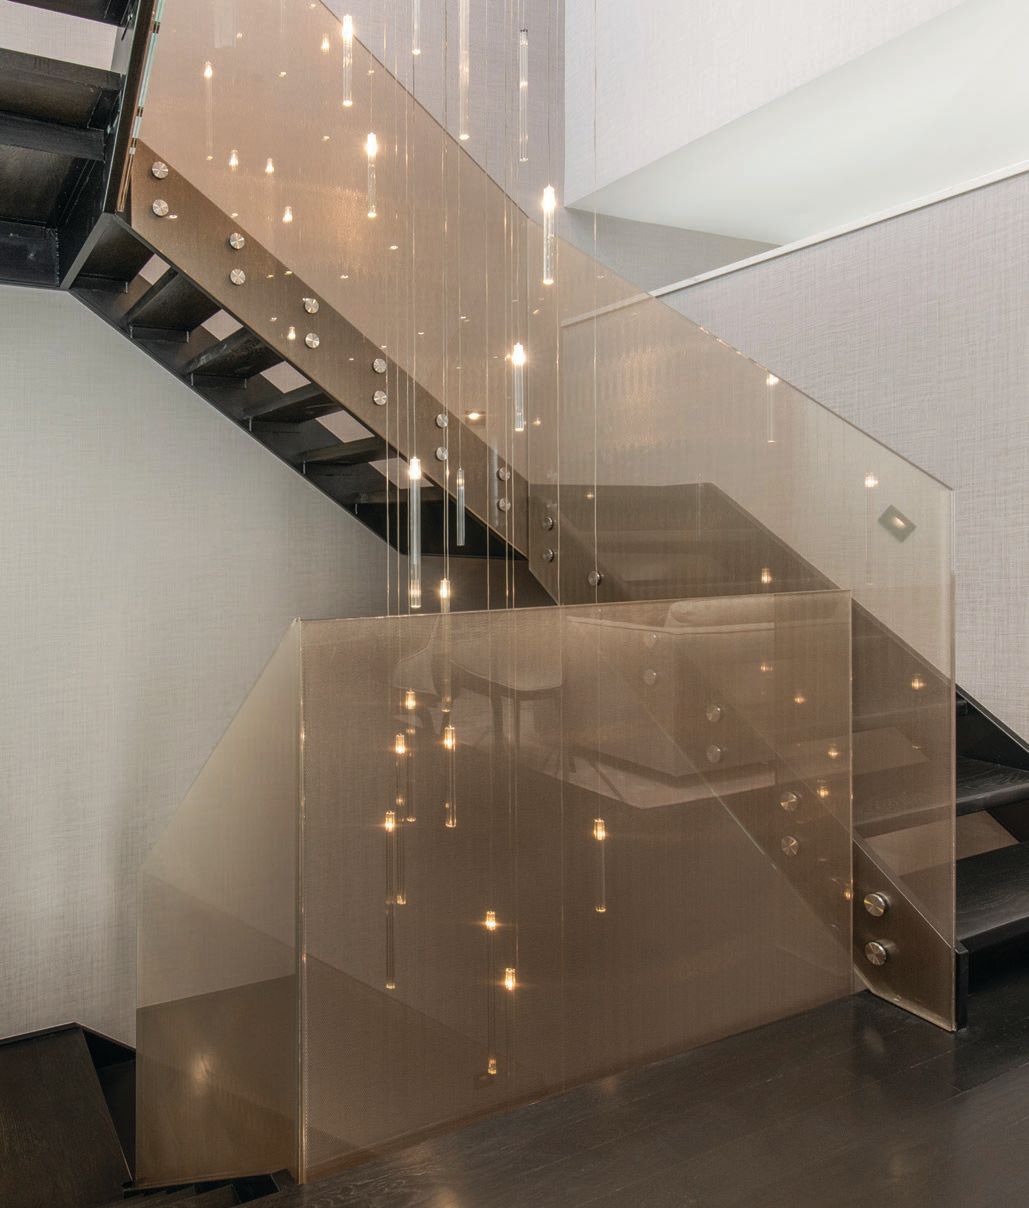 A delicate cascade of Reflex’s Comete Collezione lights illuminates the staircase. Photographed by Angelika Friday